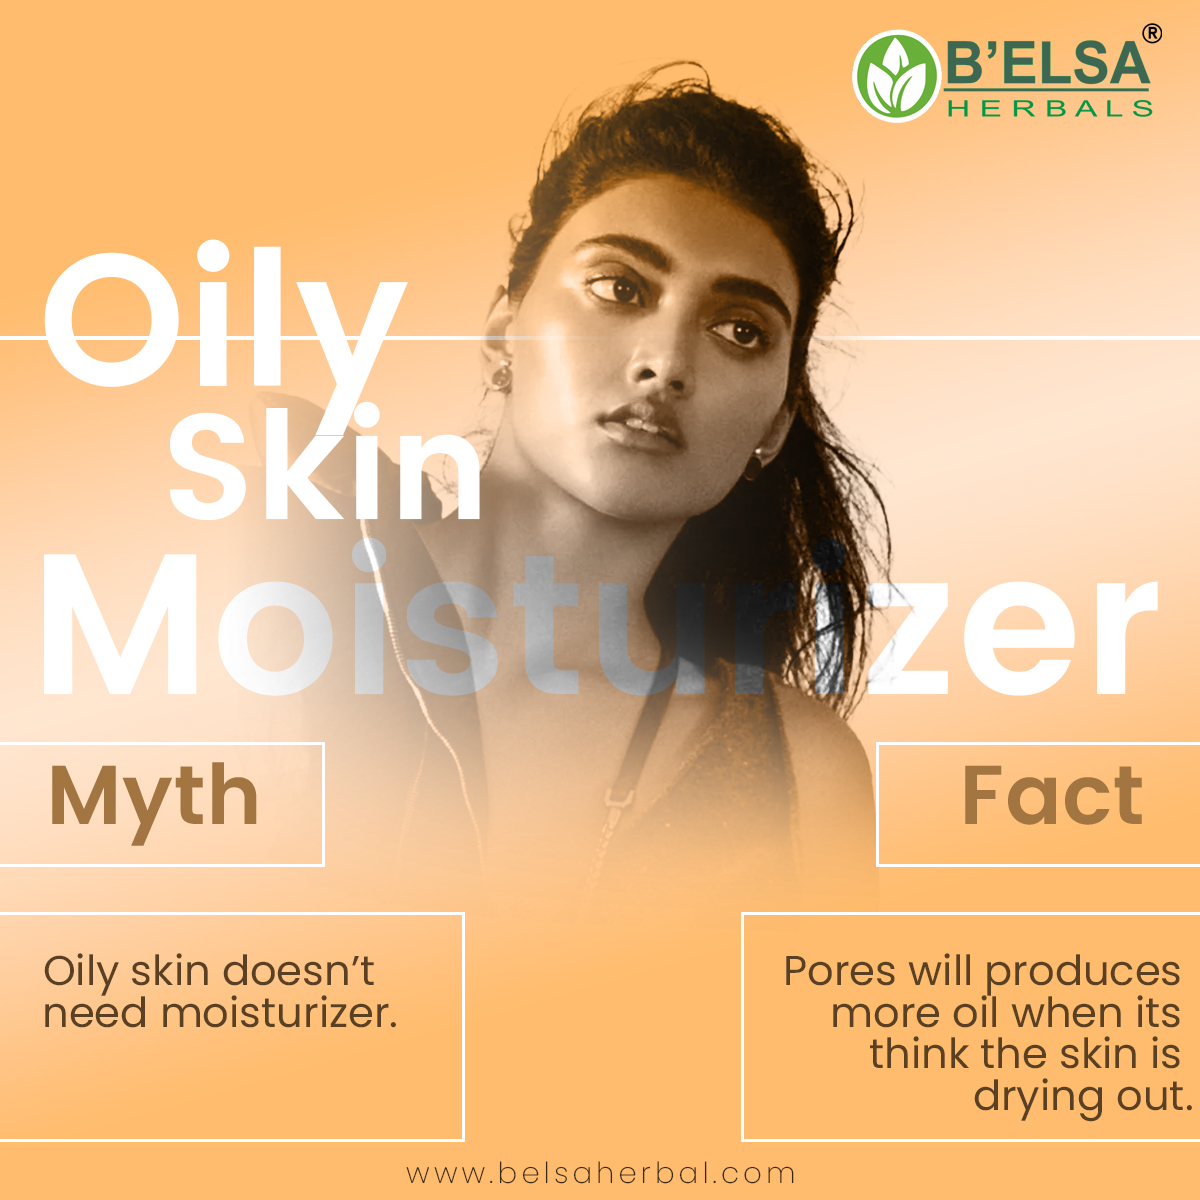 Reveal your natural glow with a little self-care for your skin.

#belsa #herbal #cosmetics #SkincareRoutine #HealthySkin #GlowingComplexion #SkincareObsessed #ClearSkinJourney #SelfCareSunday #SkincareGoals #SkinLove #NourishYourSkin #BeautyFromWithin #SkincareAddict